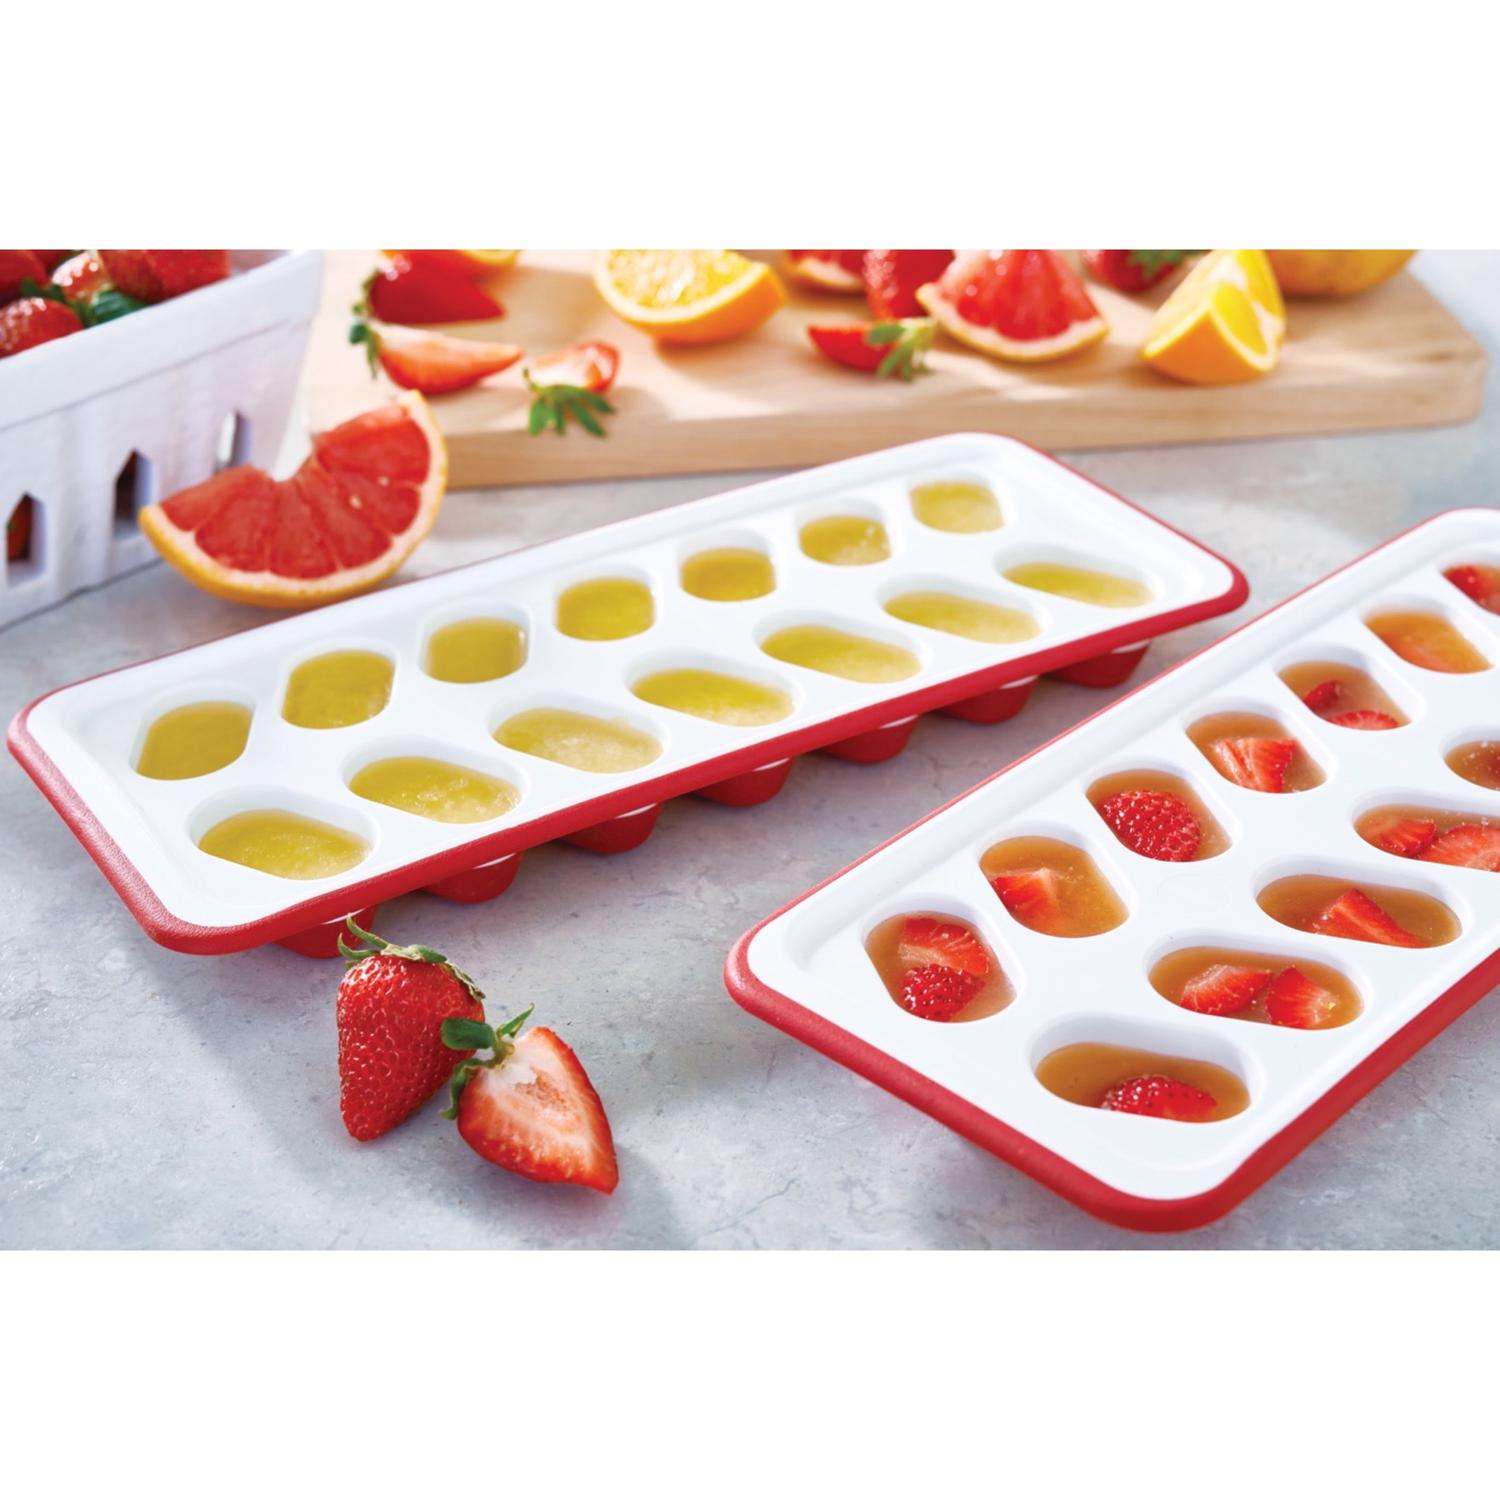 Silicone Ice Cube Tray with No-Spill Steel Rim - 2 Inch Cubes, 8-Cube